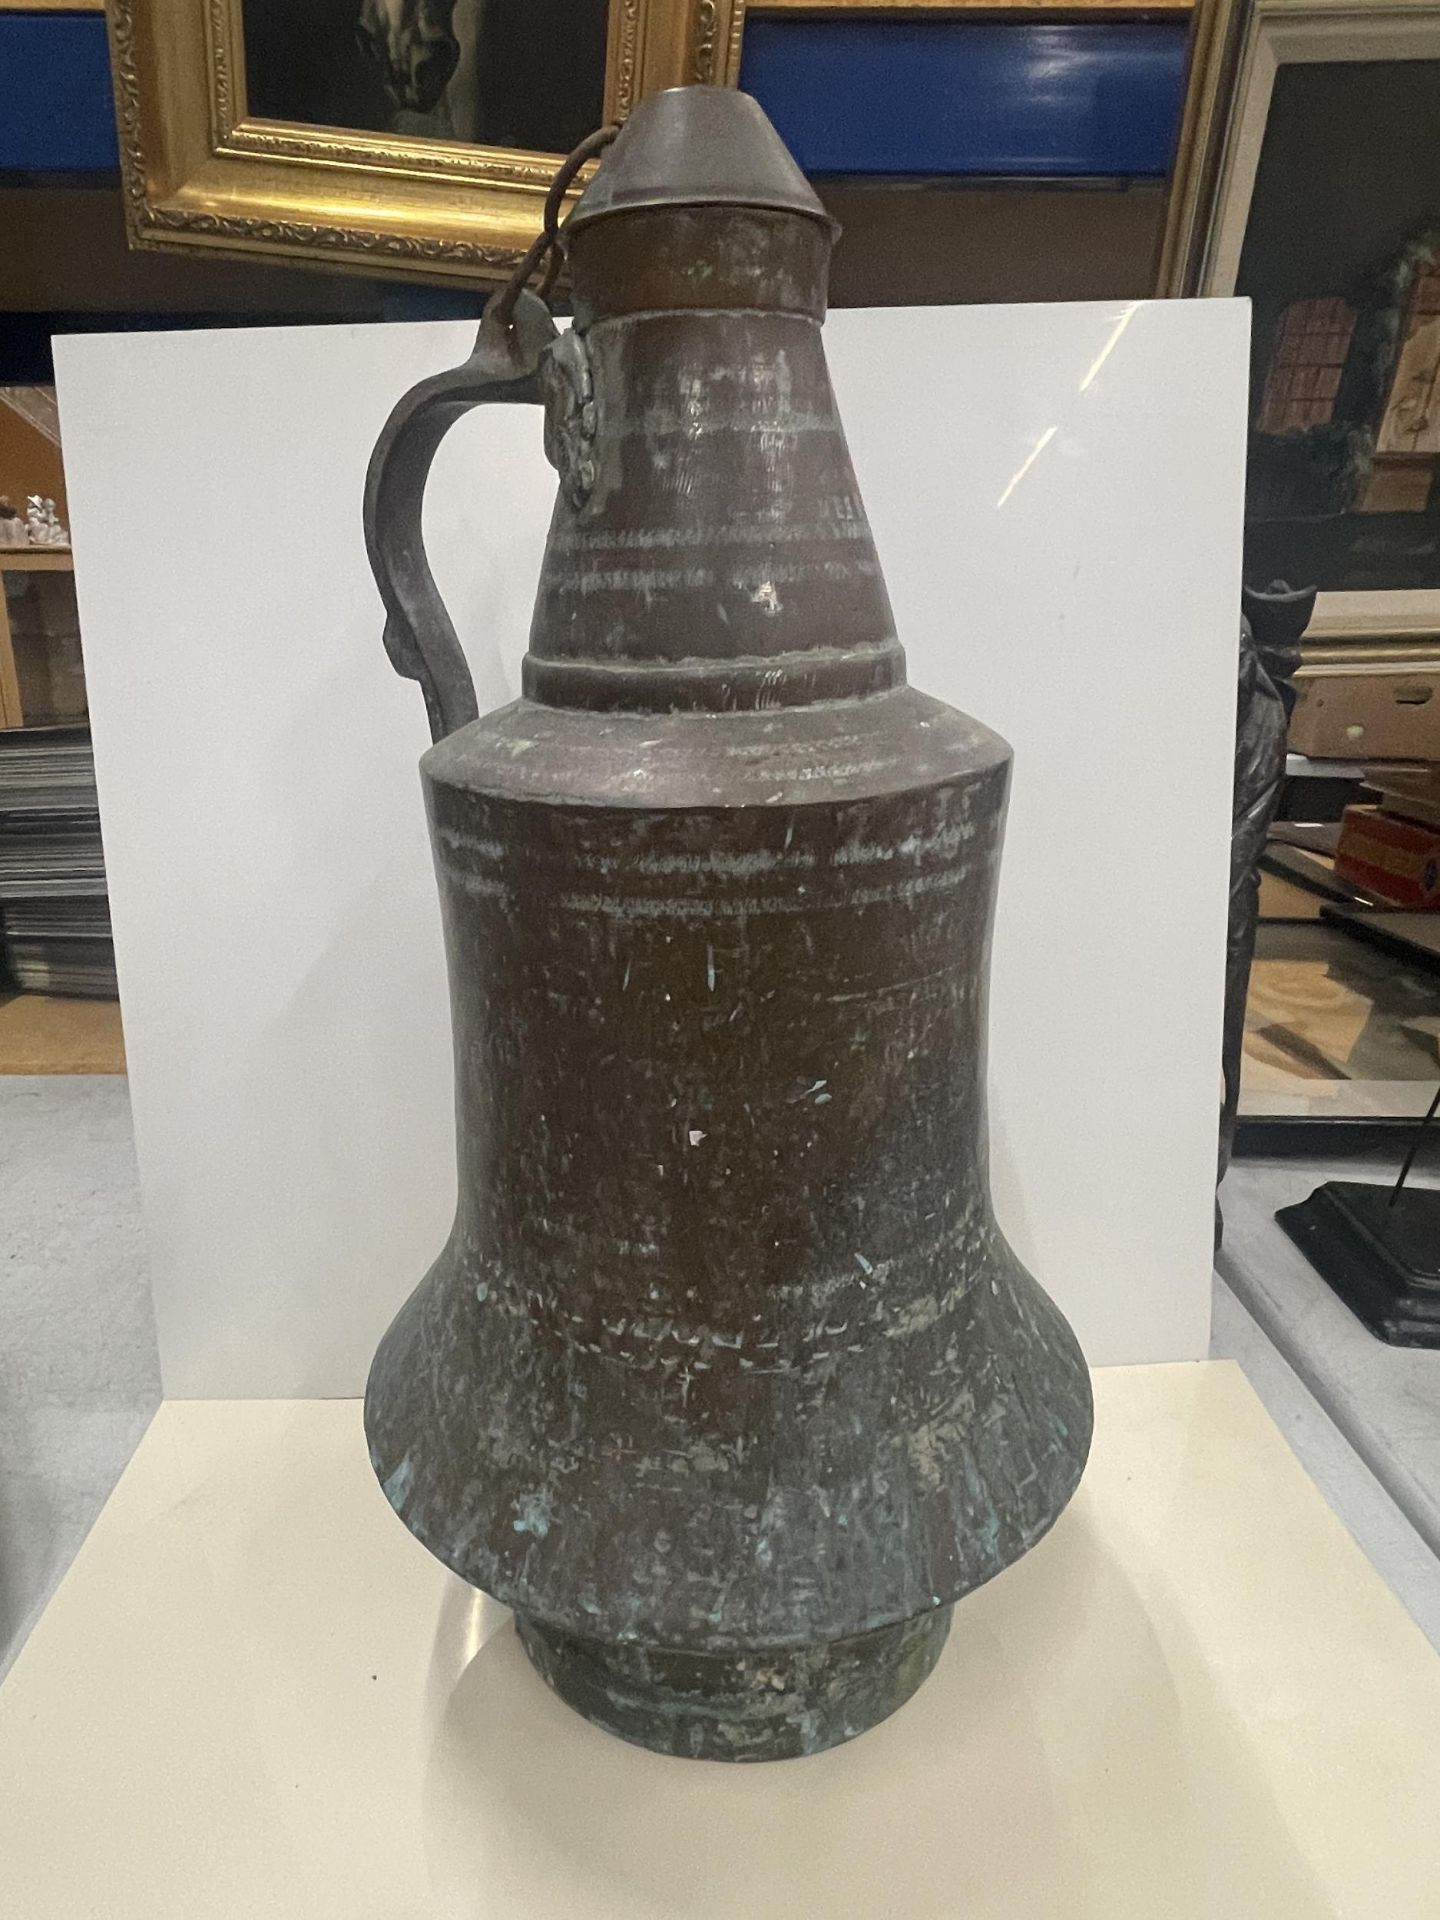 A LARGE MIDDLE EASTERN COPPER DRINKING VESSEL - INSCRIBED 'MEHMET' TO TOP